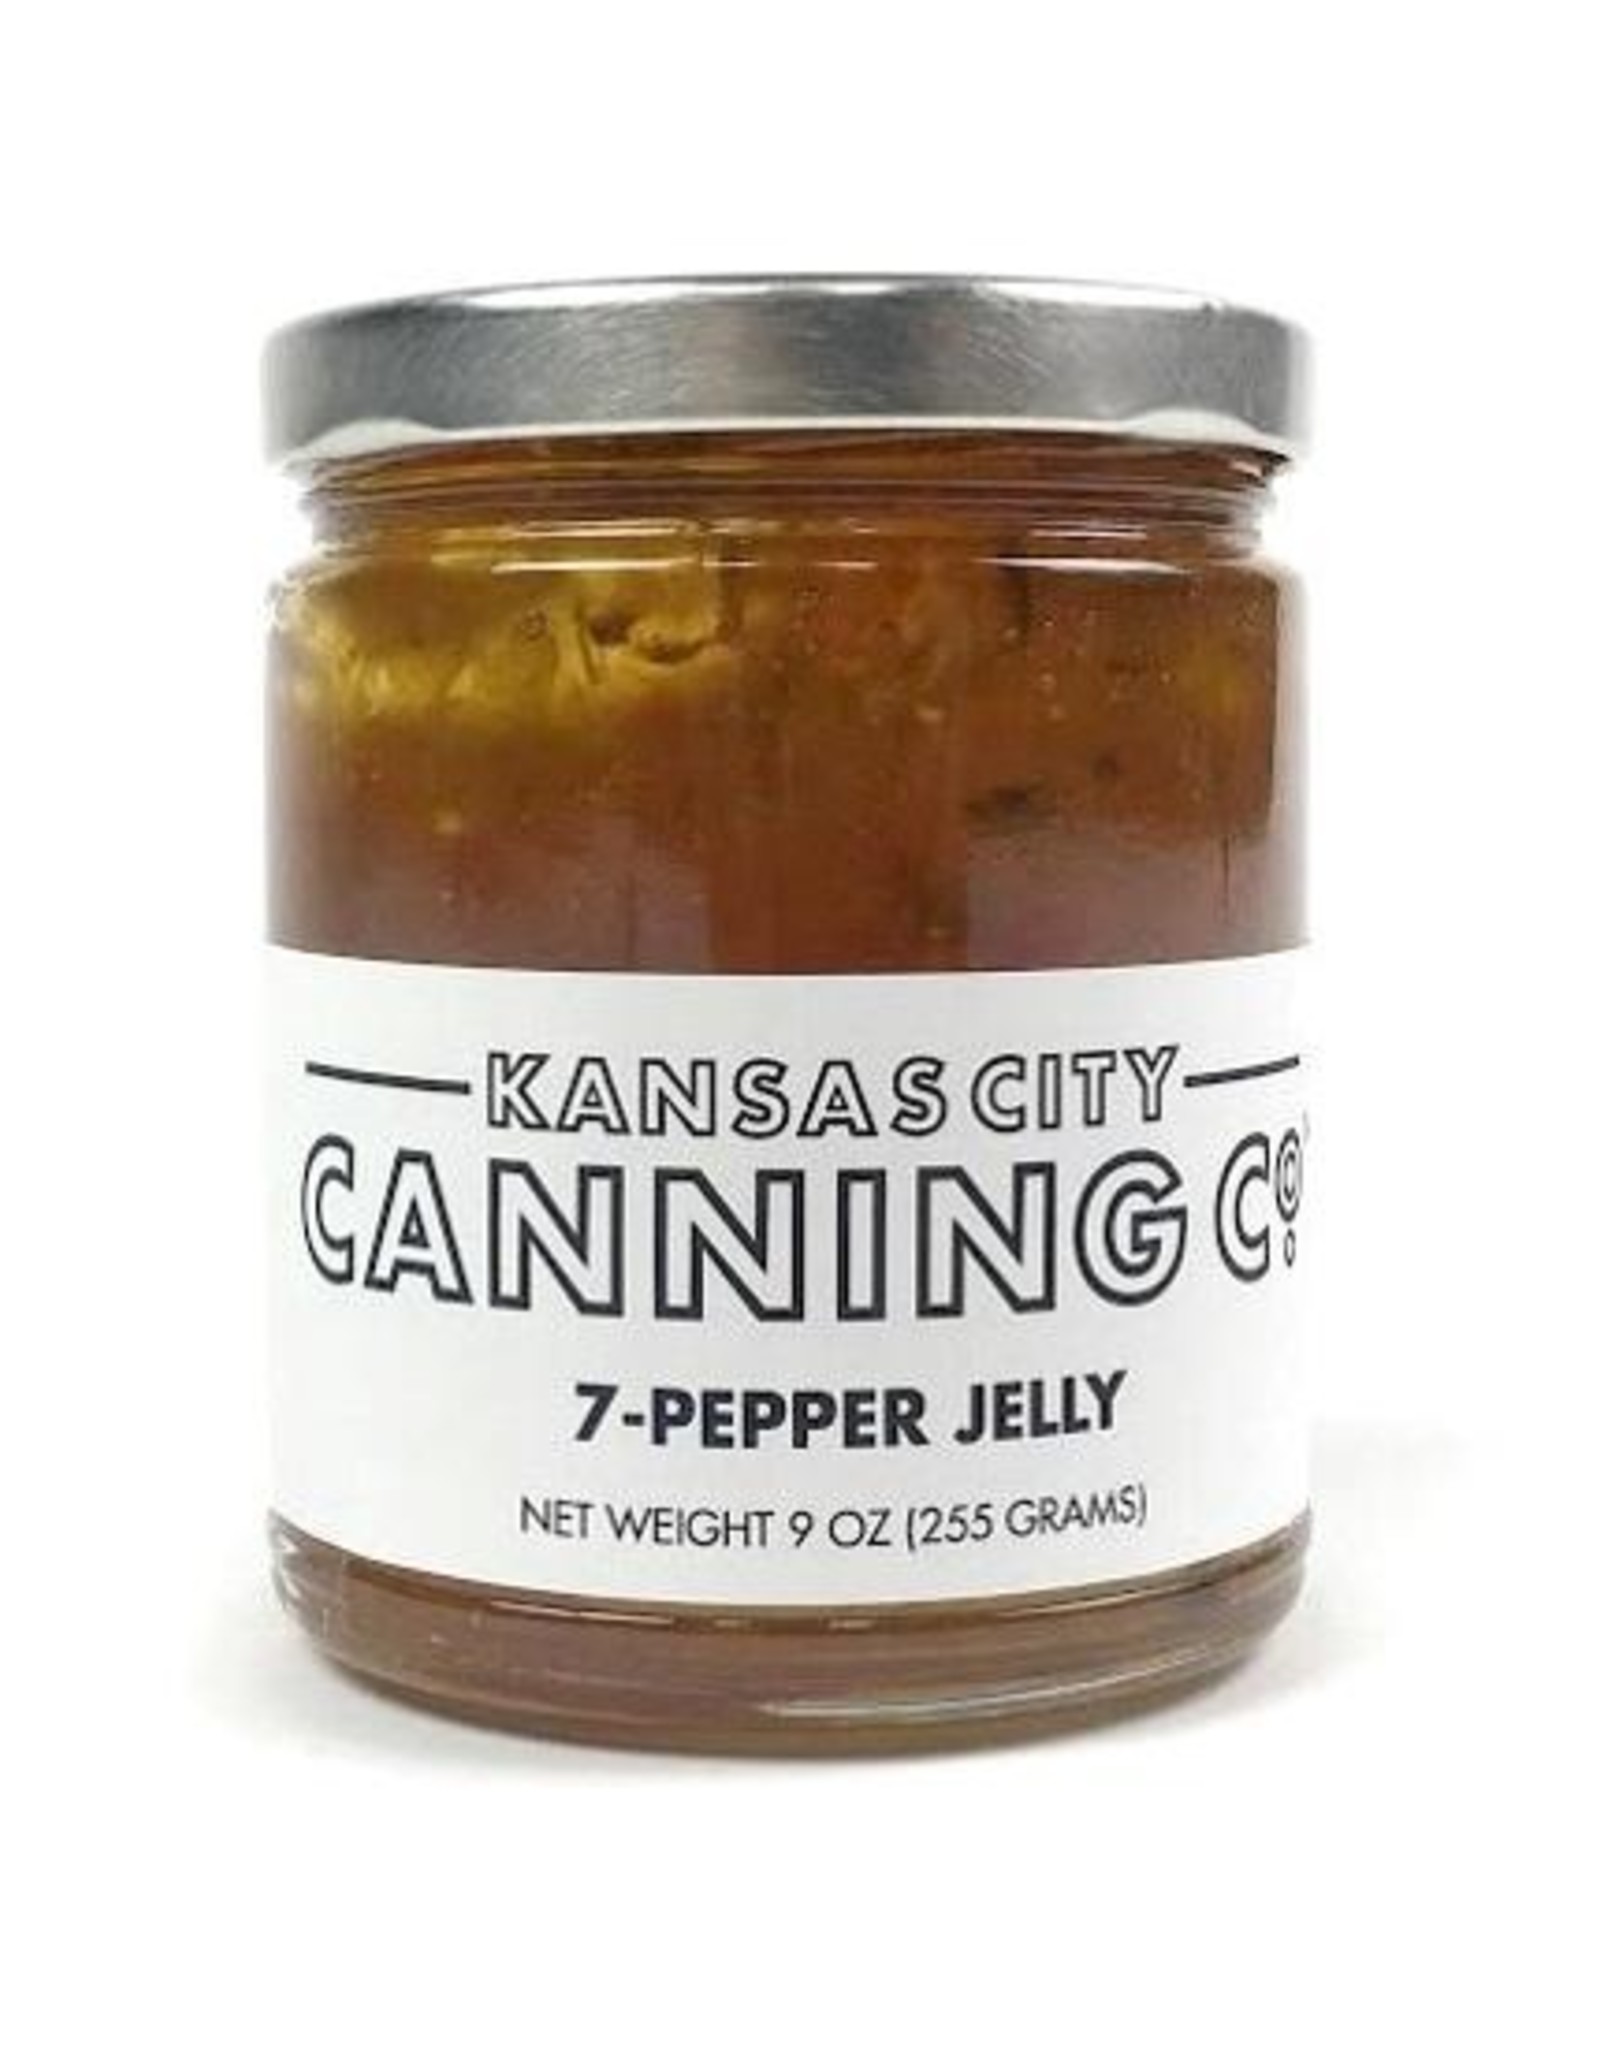 Kansas City Canning Co. Spreads, Preserves, Jellies by Kansas City Canning Co.